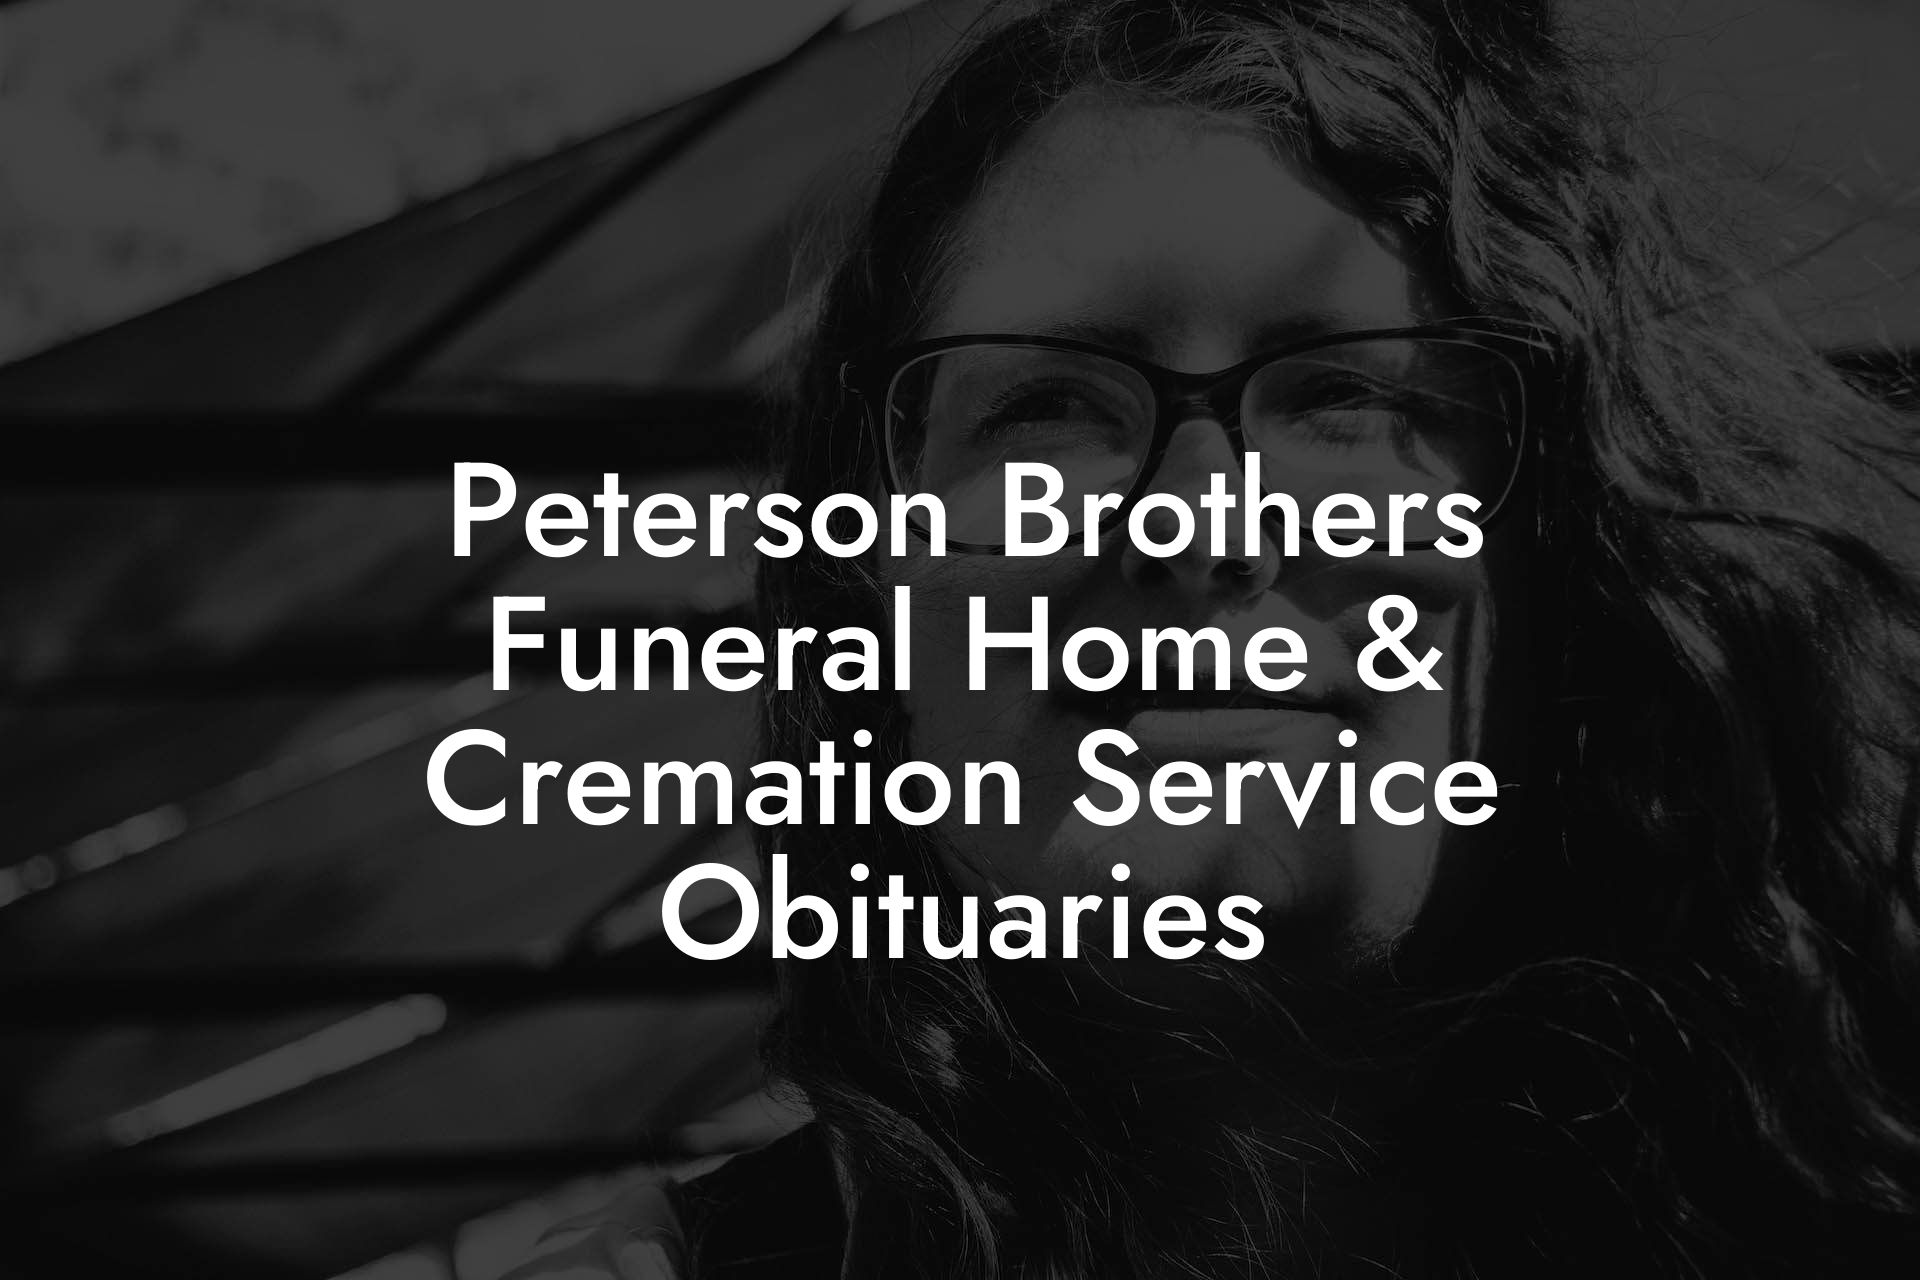 Peterson Brothers Funeral Home & Cremation Service Obituaries Eulogy